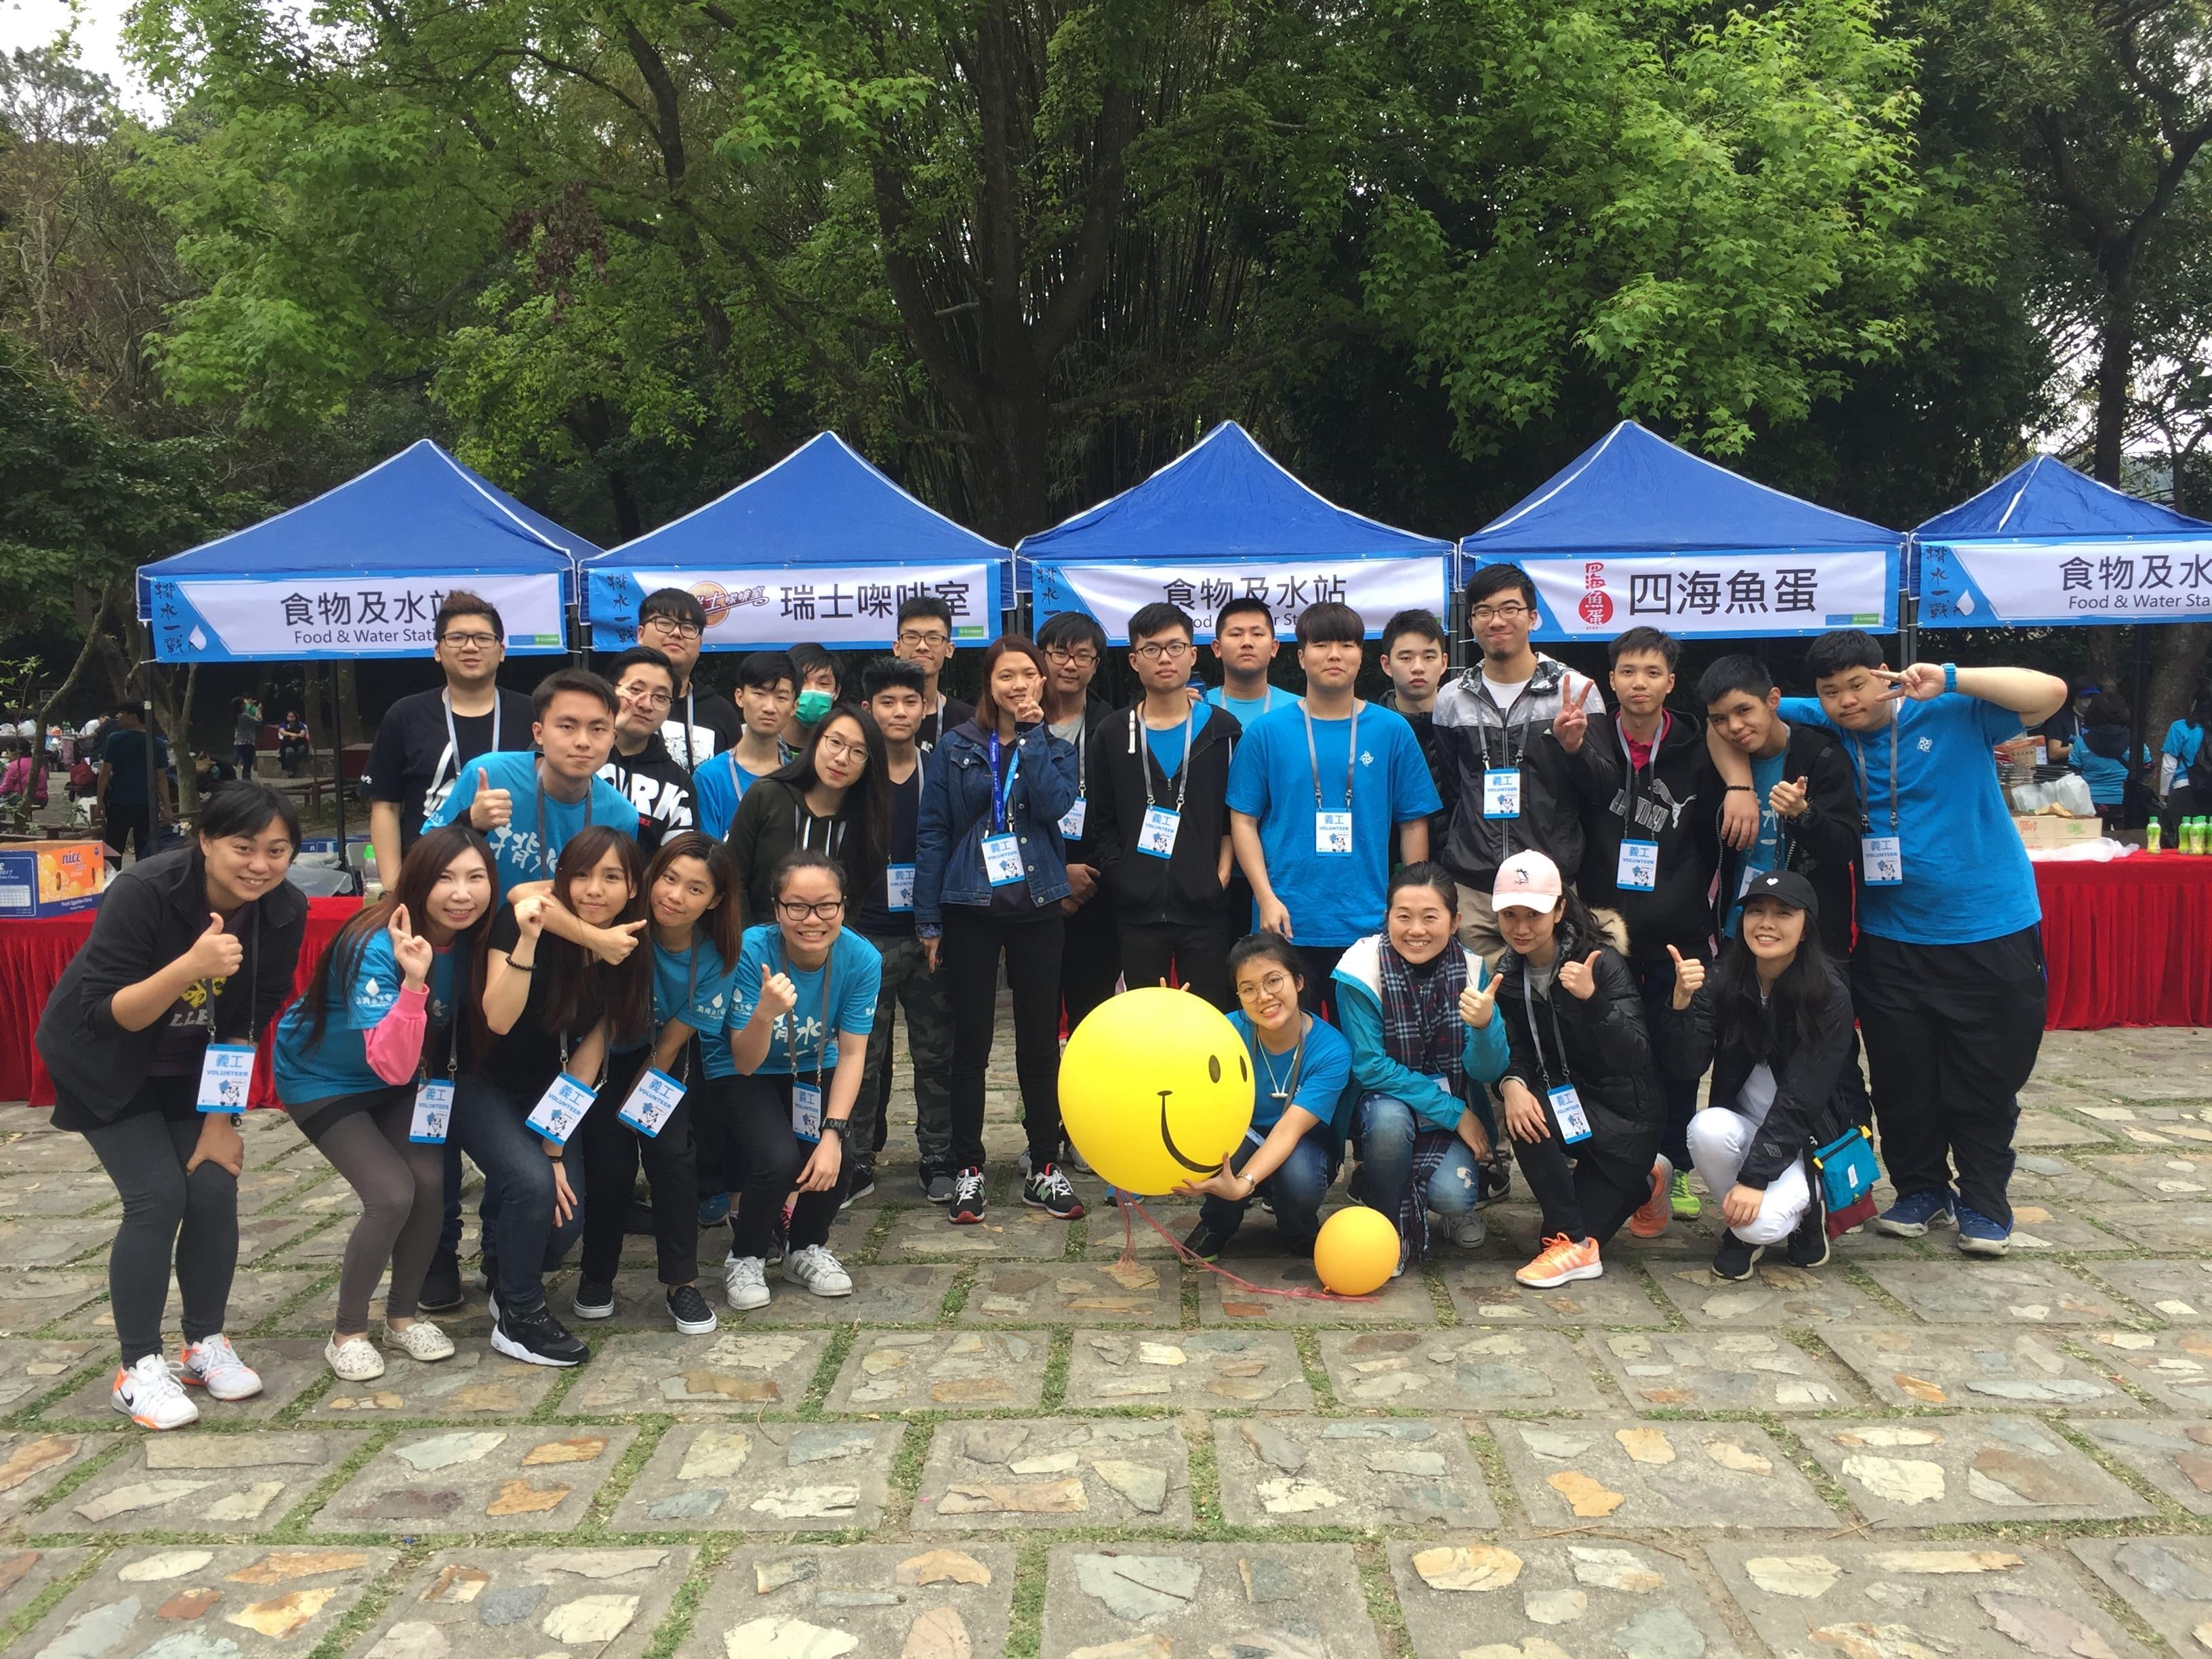 Student Volunteers cheered up the runners in “Run For Water” Competition 